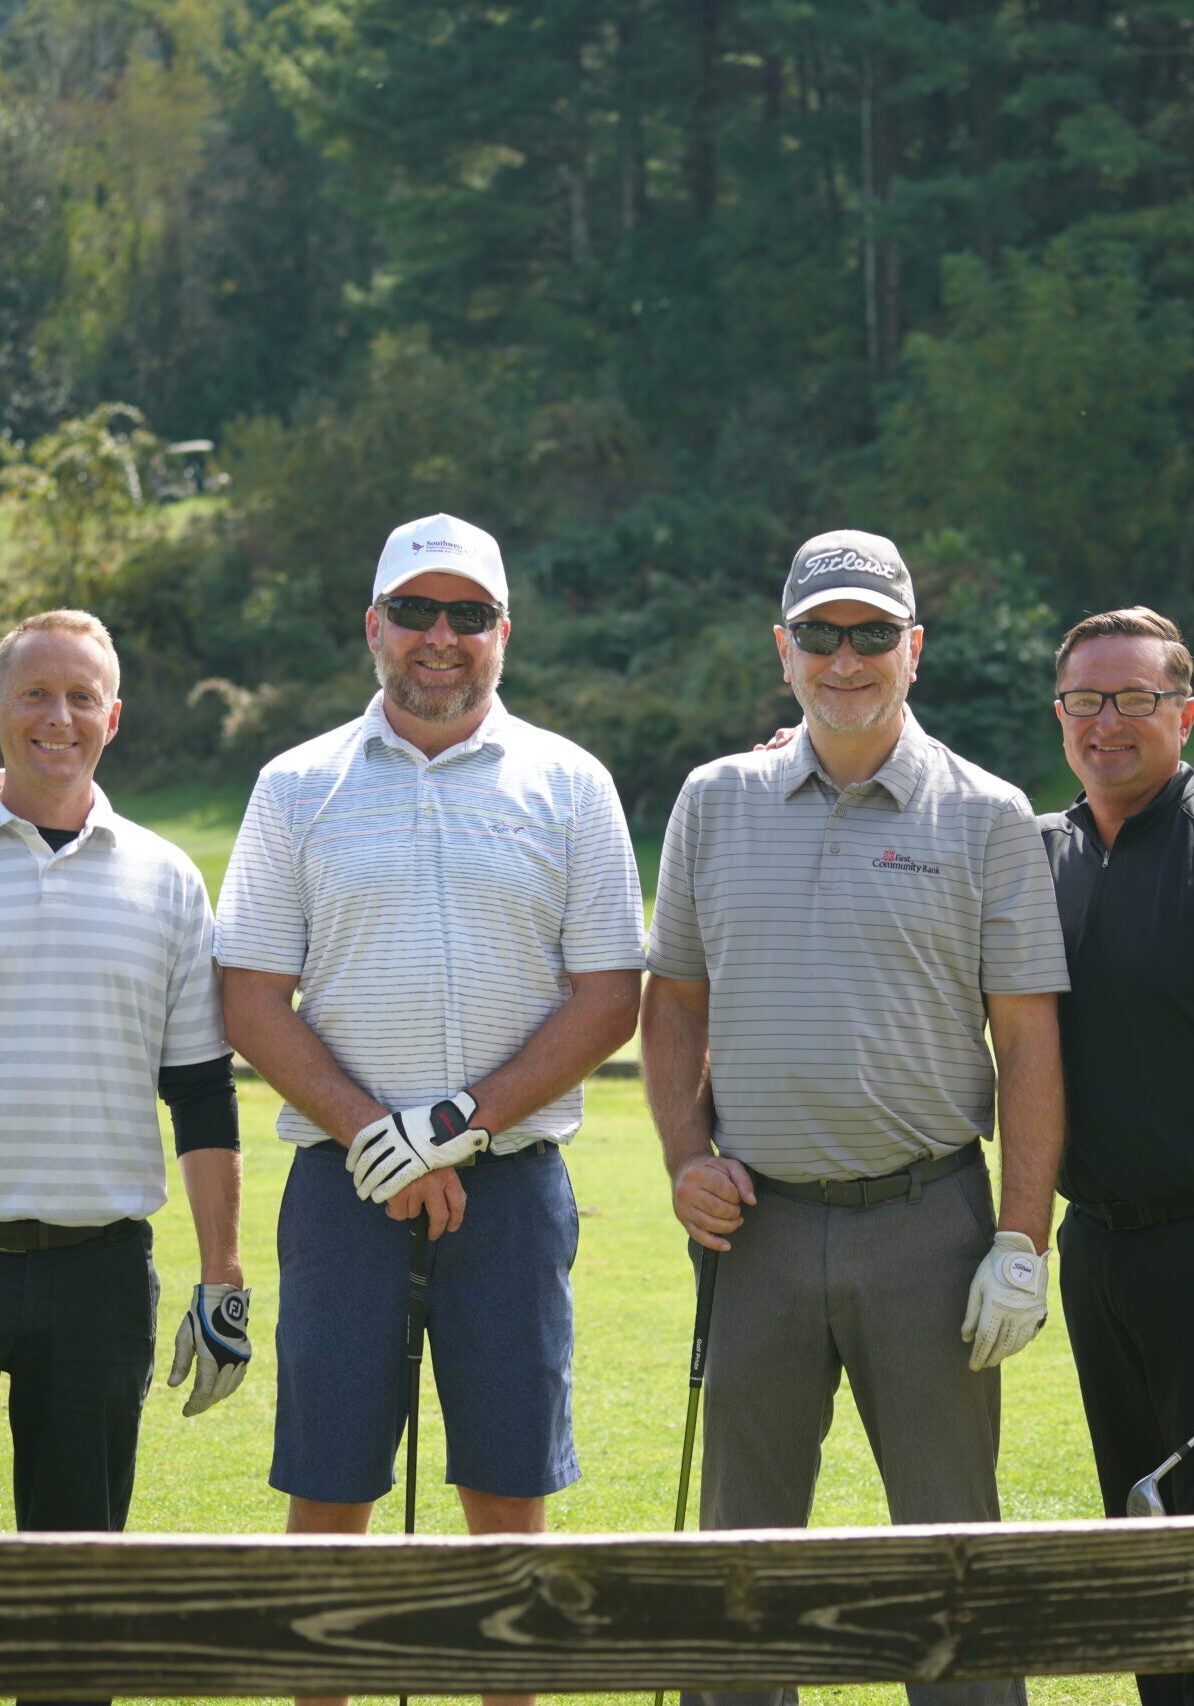 Team playing at 2023 Scholarship Golf Classic